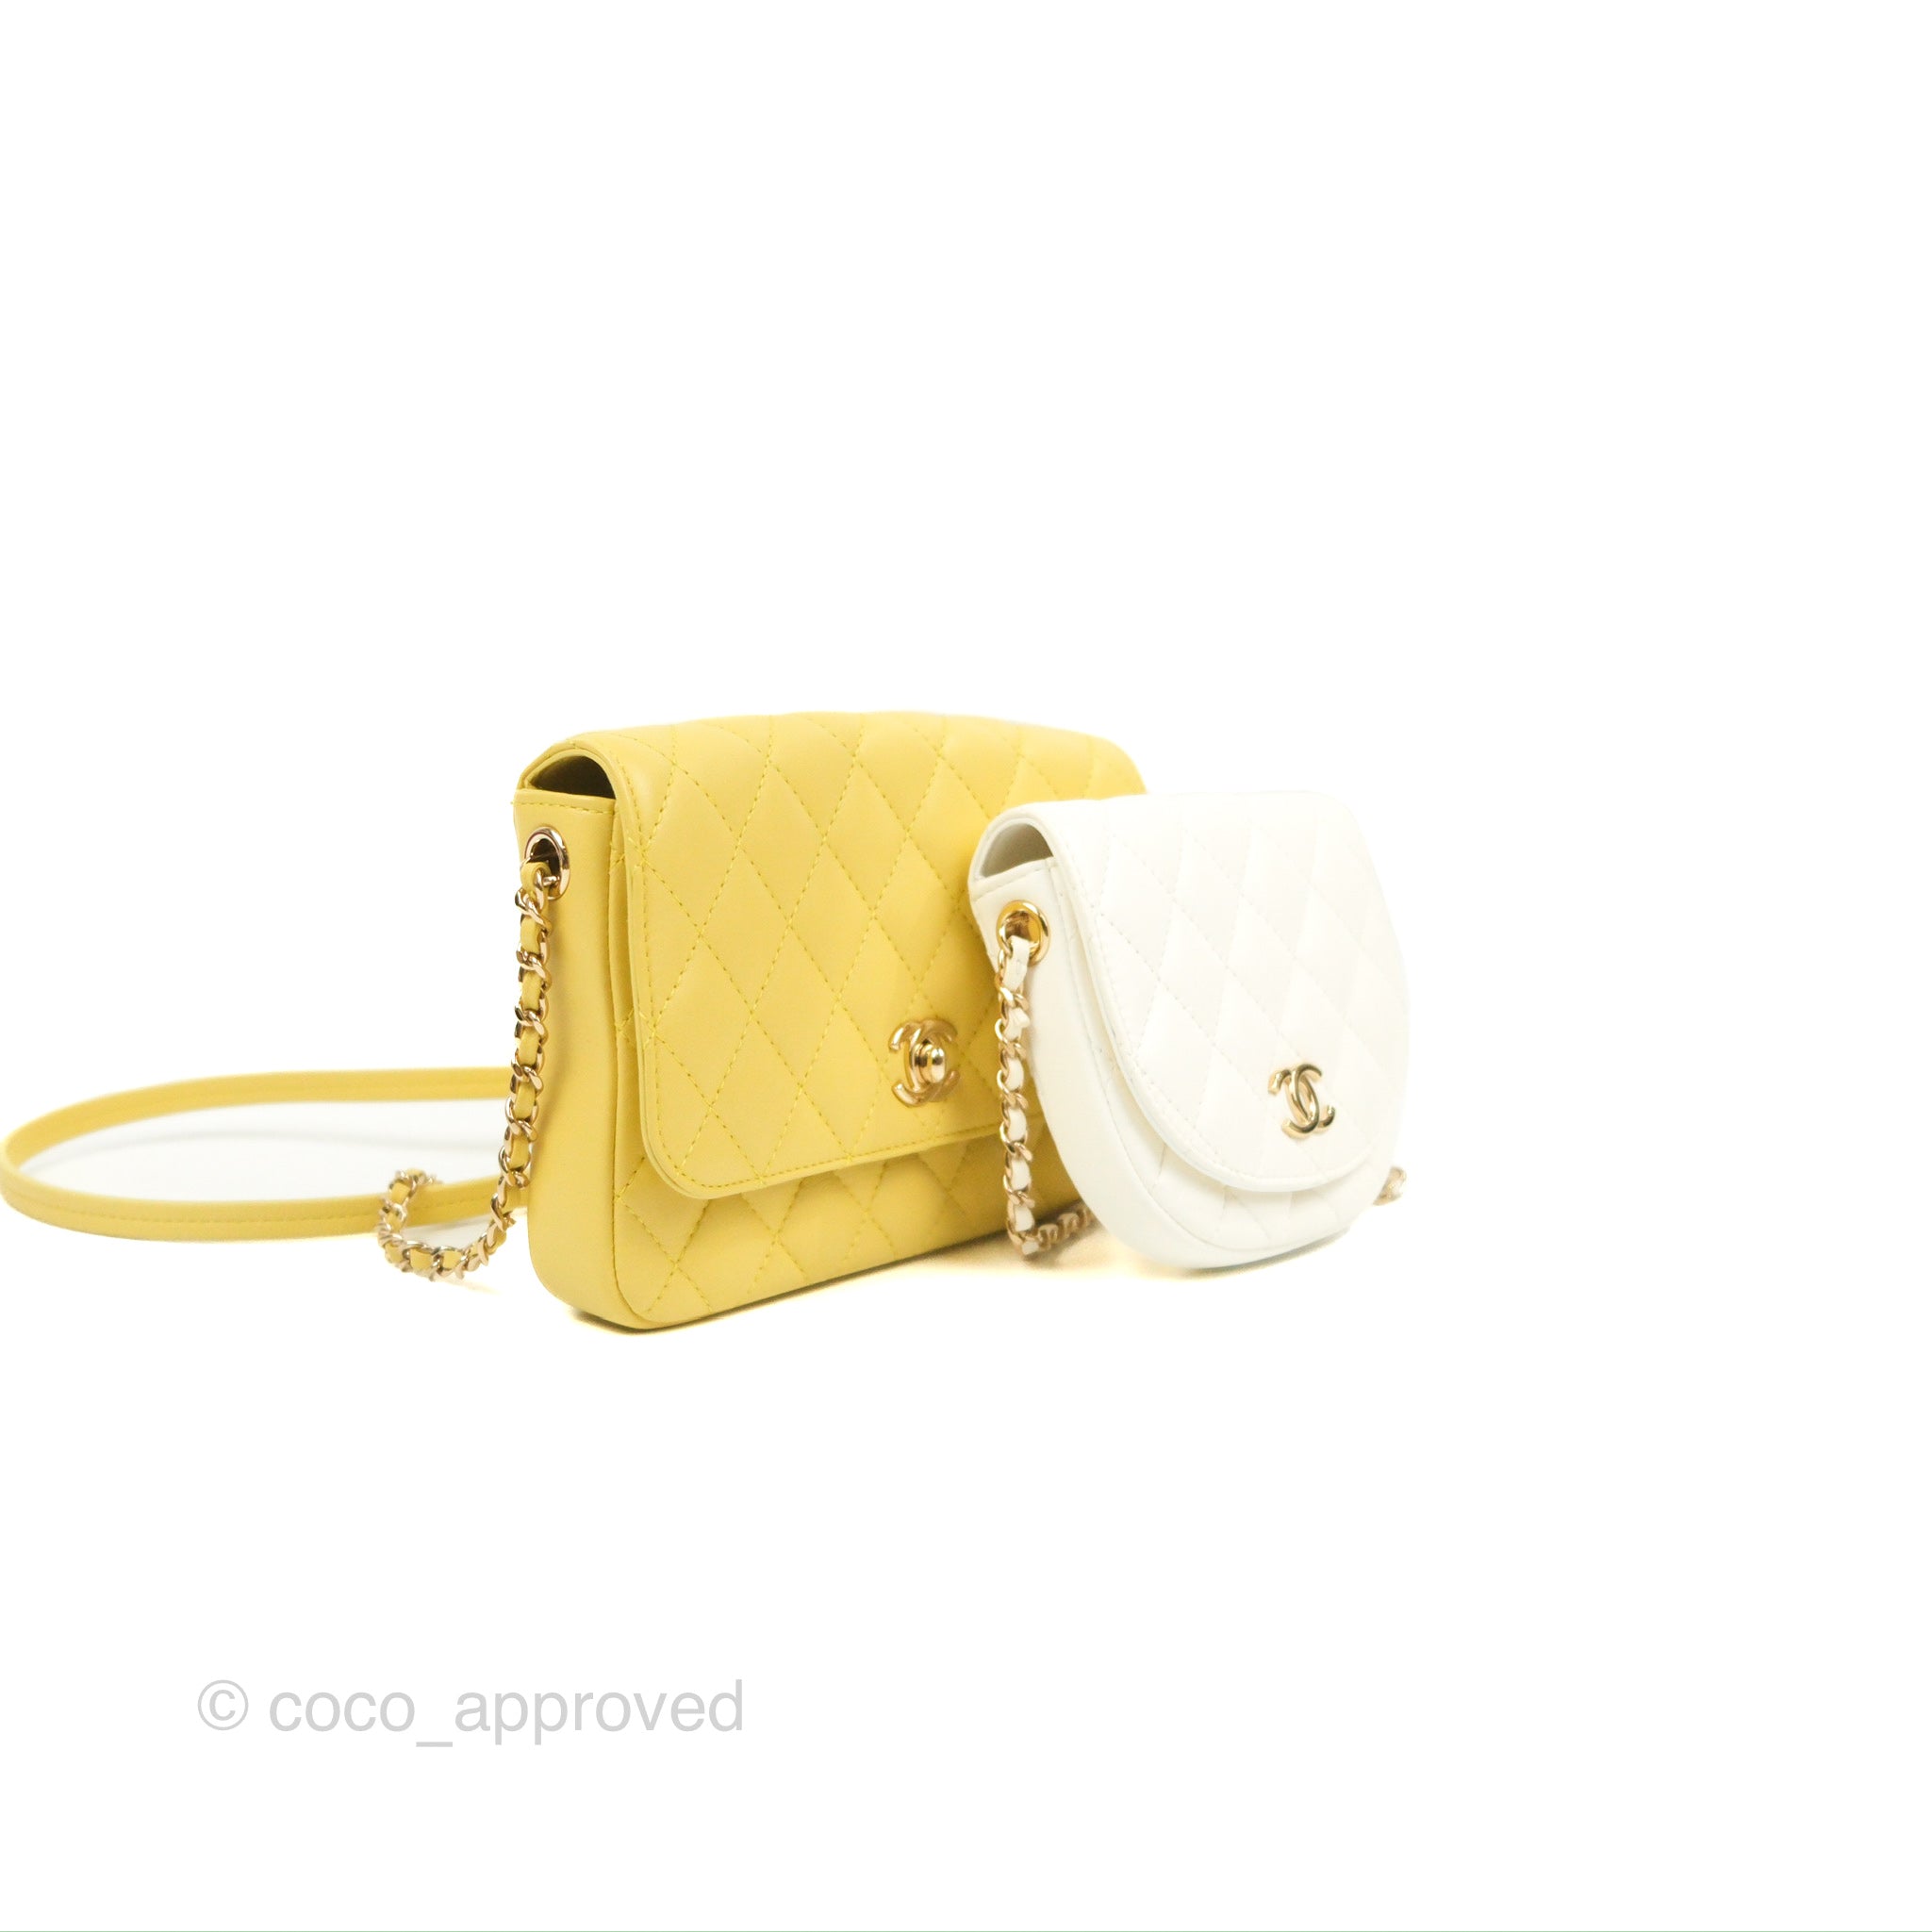 Chanel Yellow & White Quilted Lambskin Side Packs Bag Q6B4E21IMB000